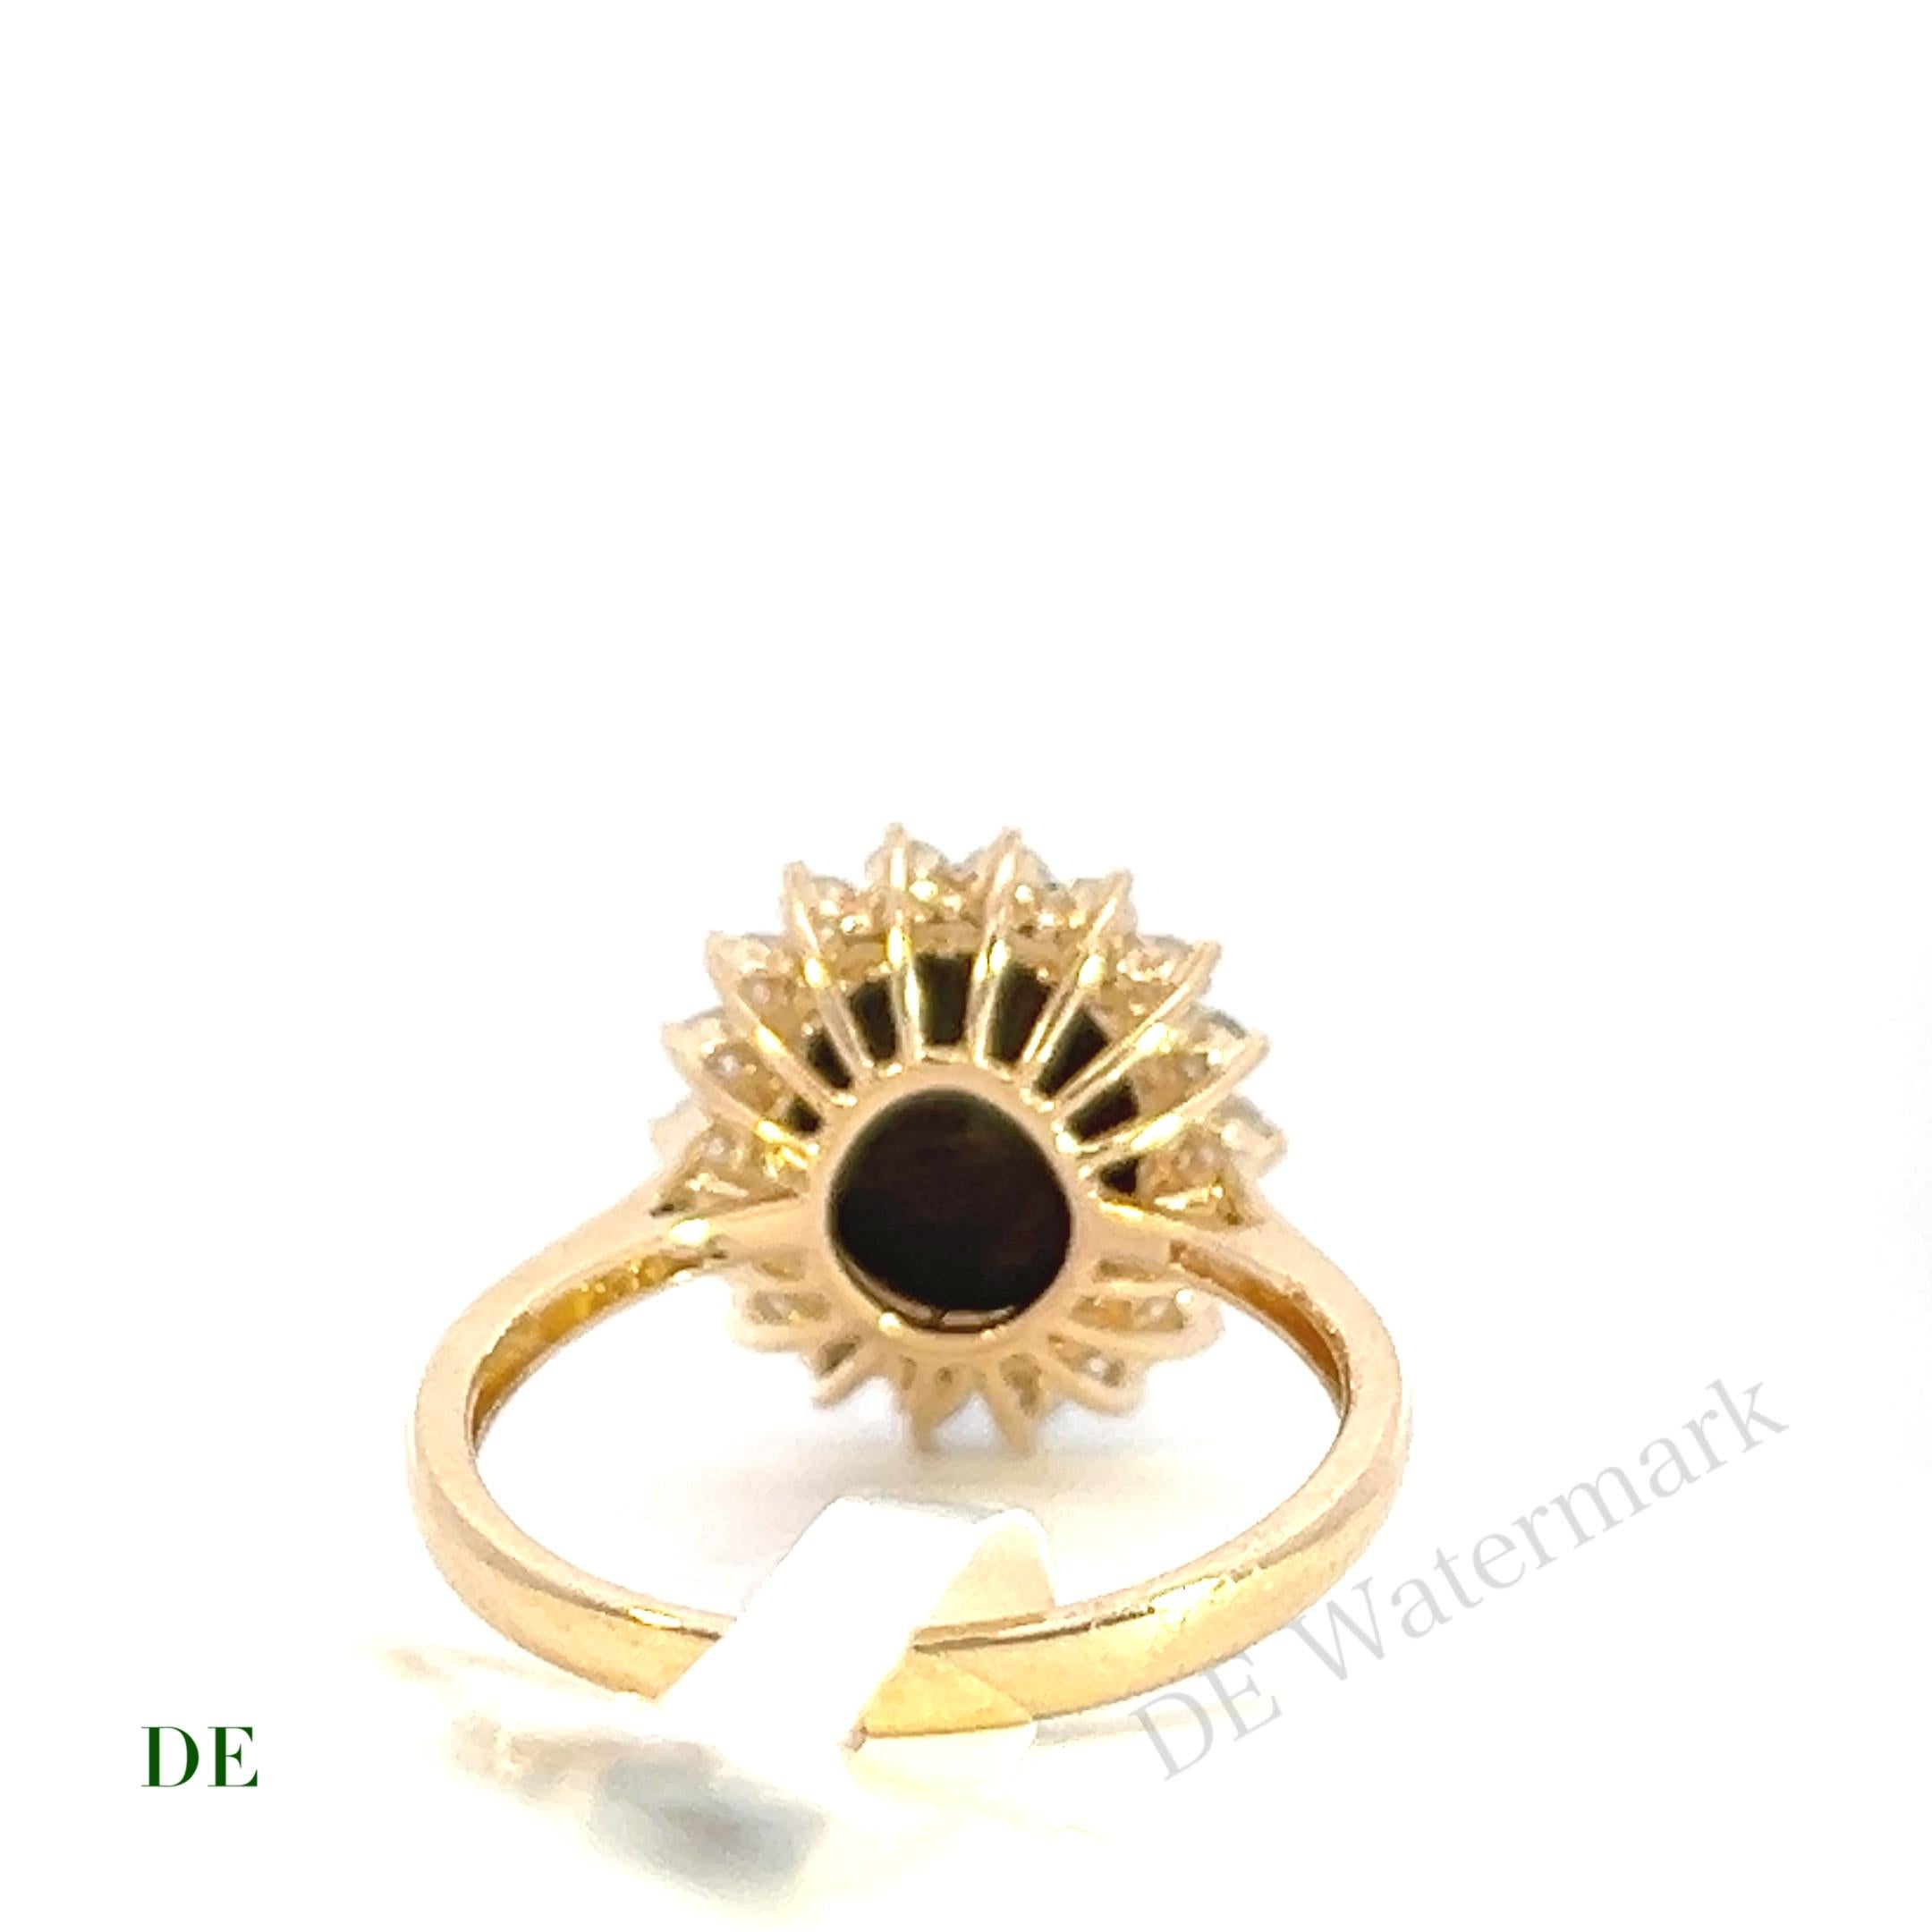 Cabochon Rare Exclusive 14k Yellow Gold 3.39 crt Black Star Sapphire .51 crt Diamond ring For Sale